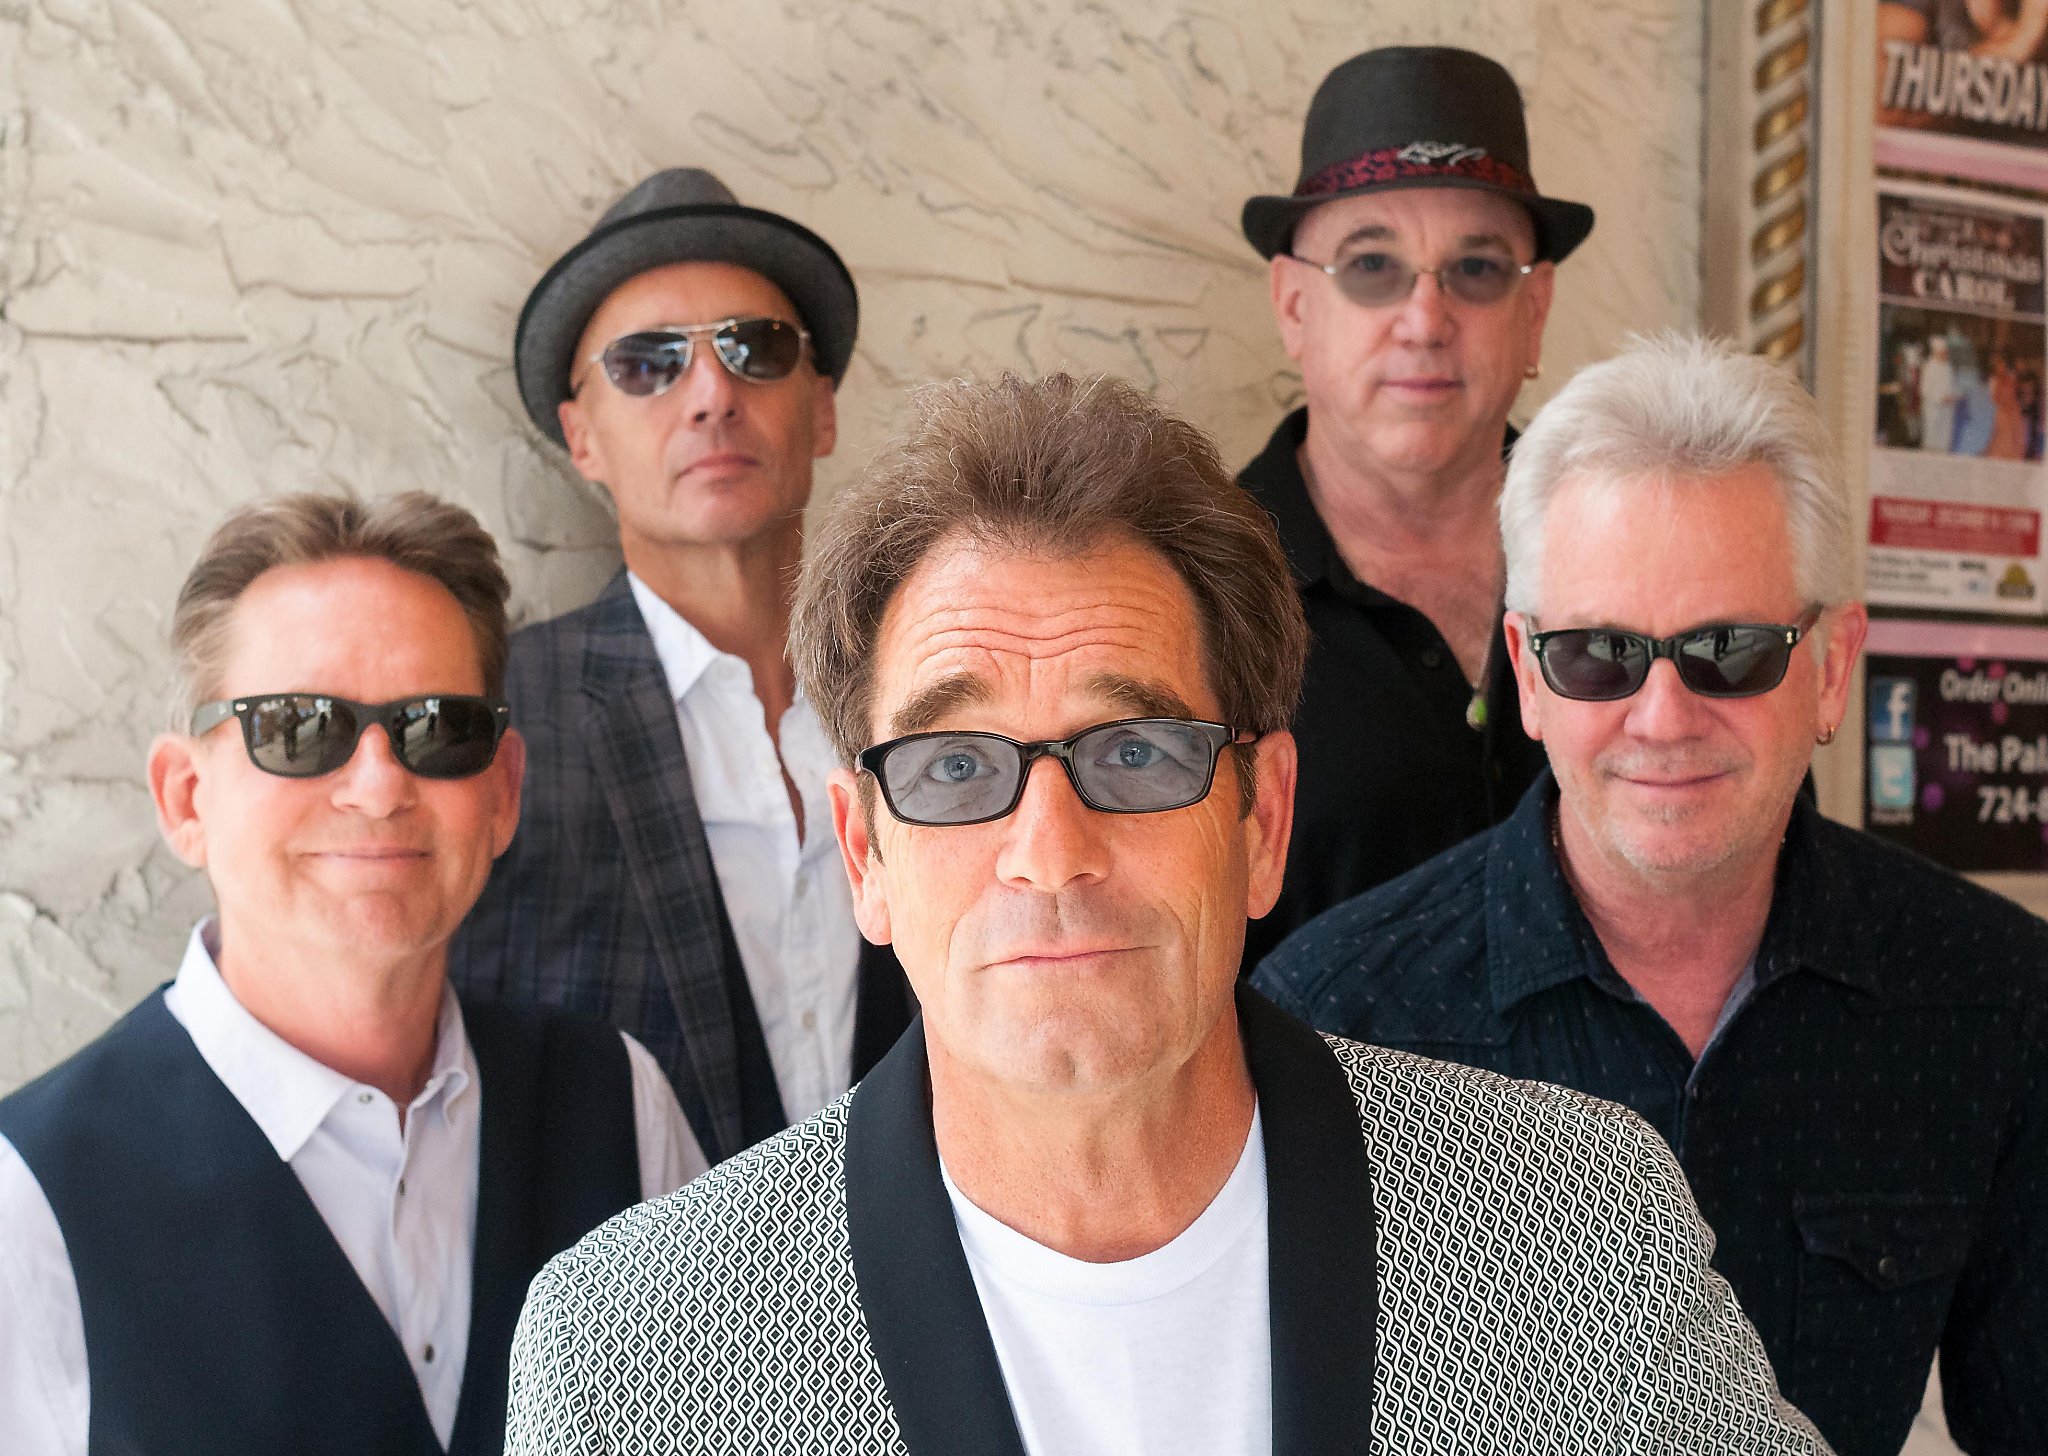 Spread the news, Huey Lewis back in Marin.